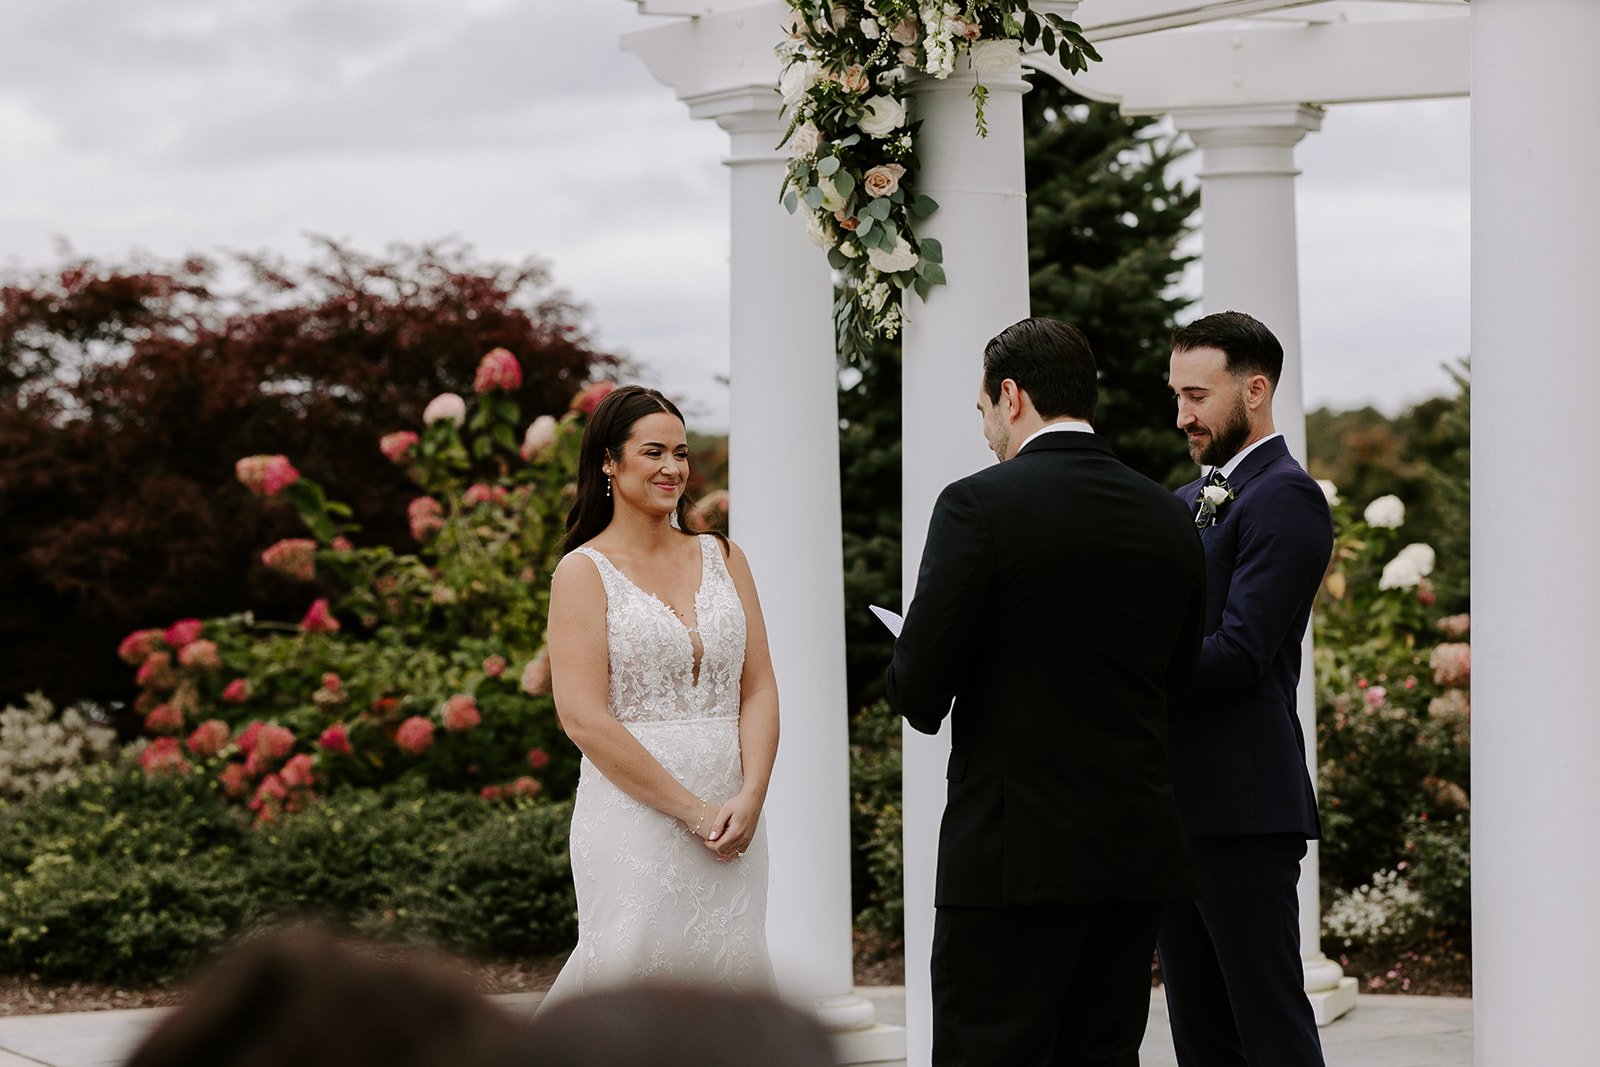 Stunning bride and groom stand together during their perfect New England wedding day